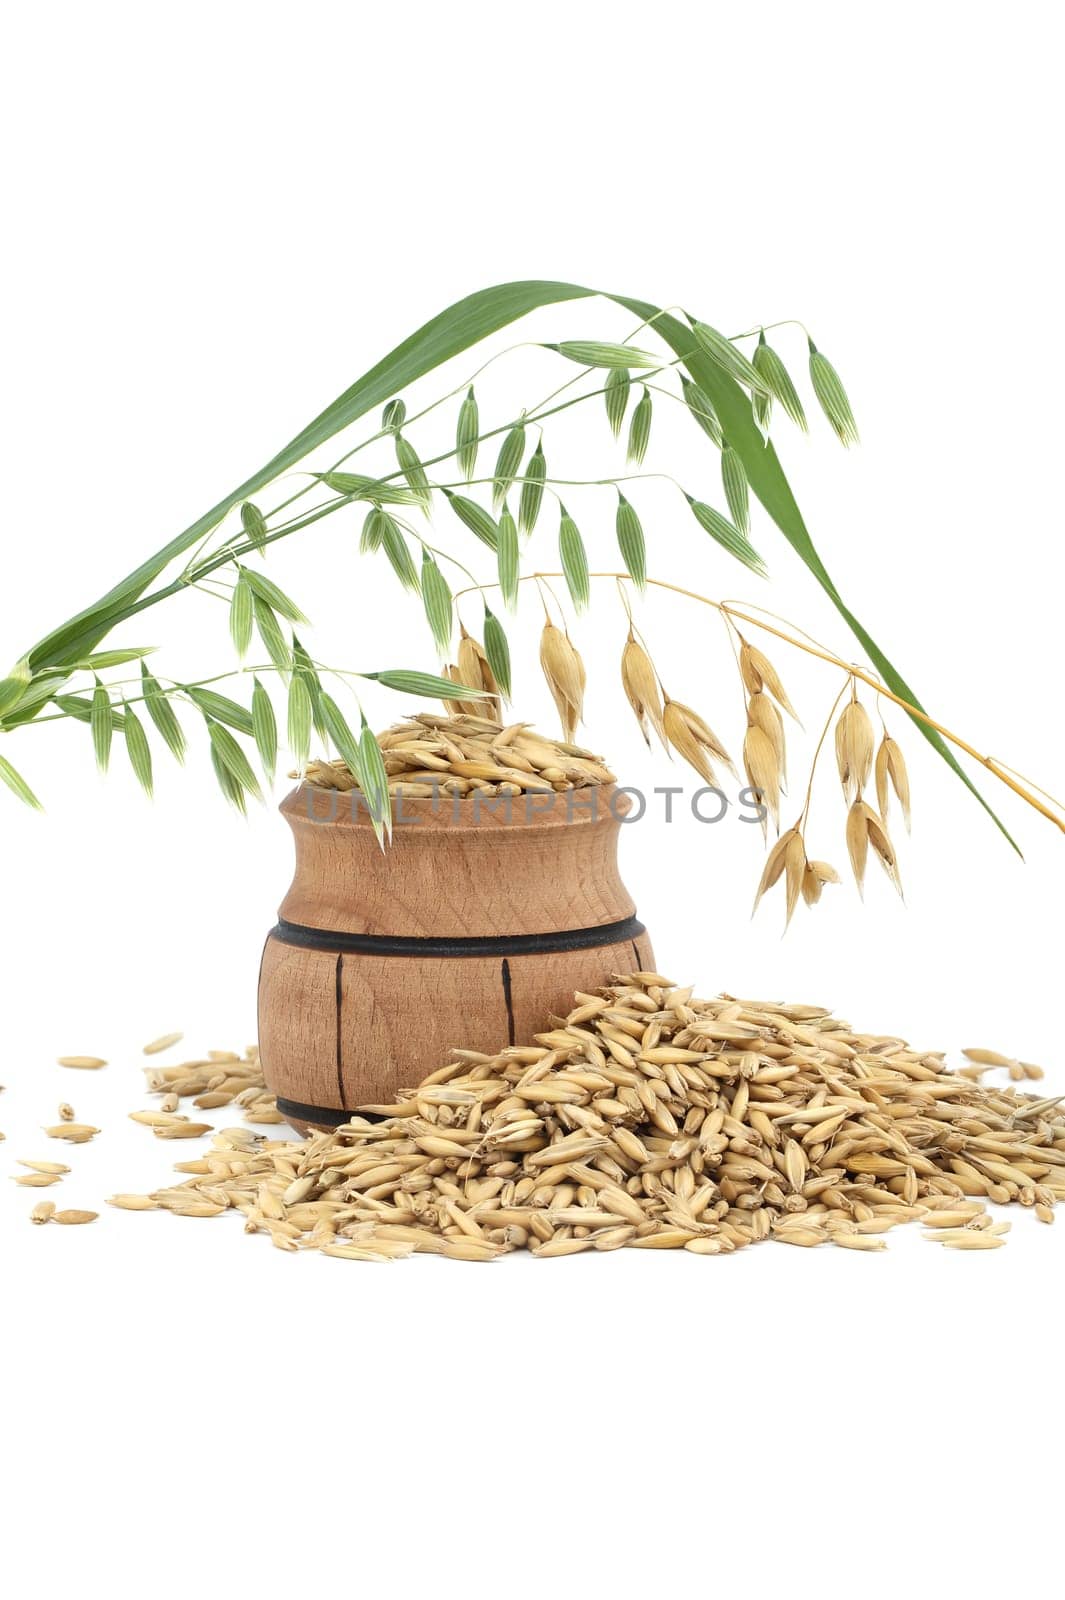 Organic whole oat grain seeds with hulls or husks isolated on a white background. Agriculture, diet and nutrition